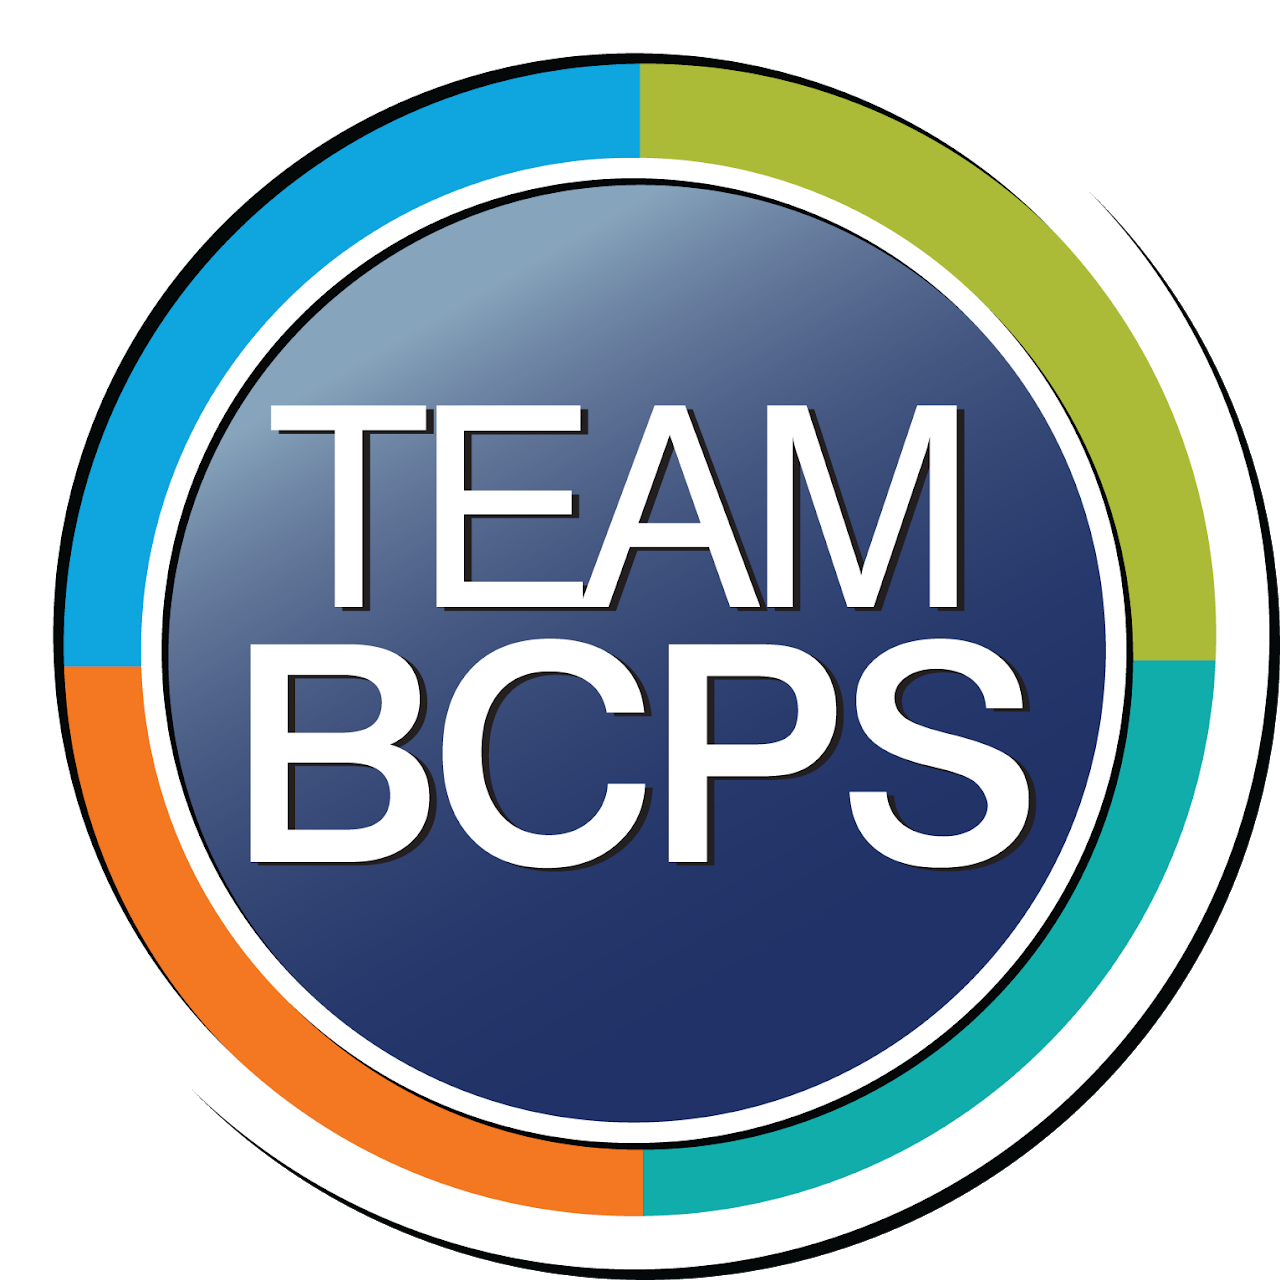 Register for Bcps Schoology at Bcps.Schoology.Com and Log In